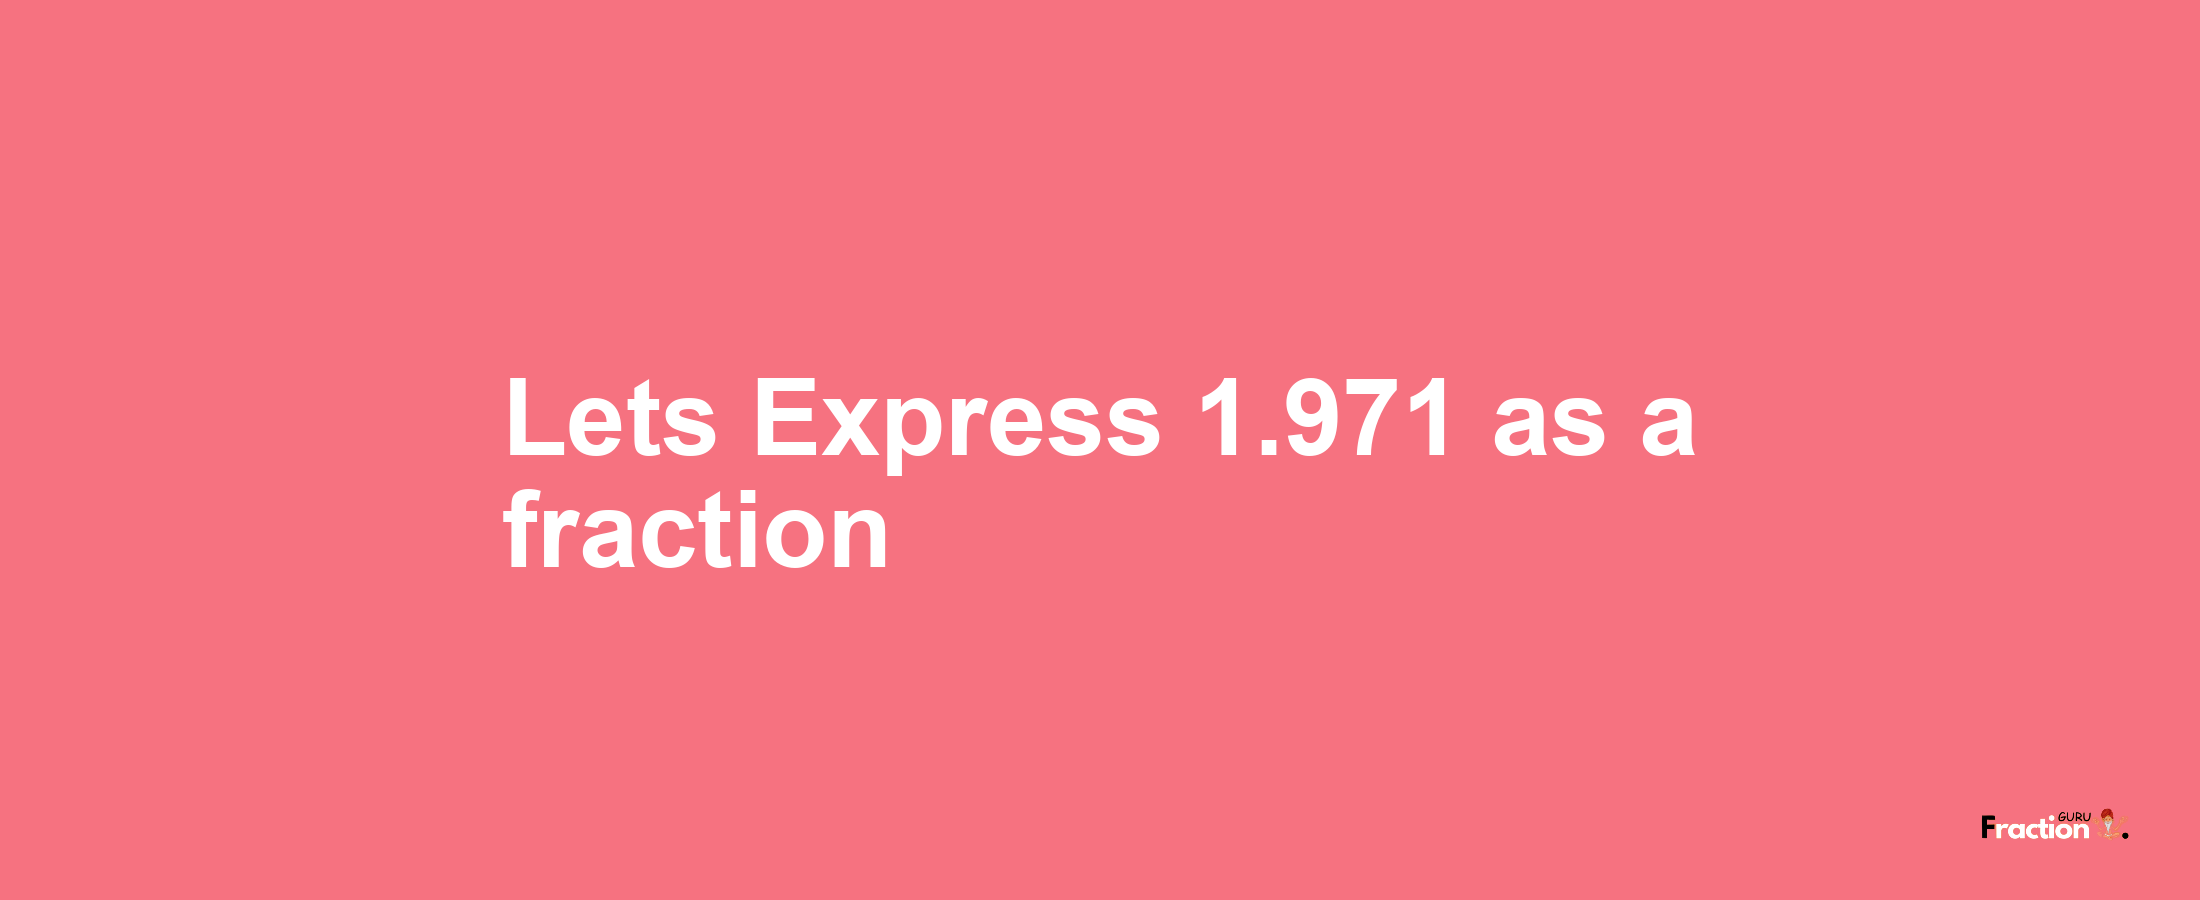 Lets Express 1.971 as afraction